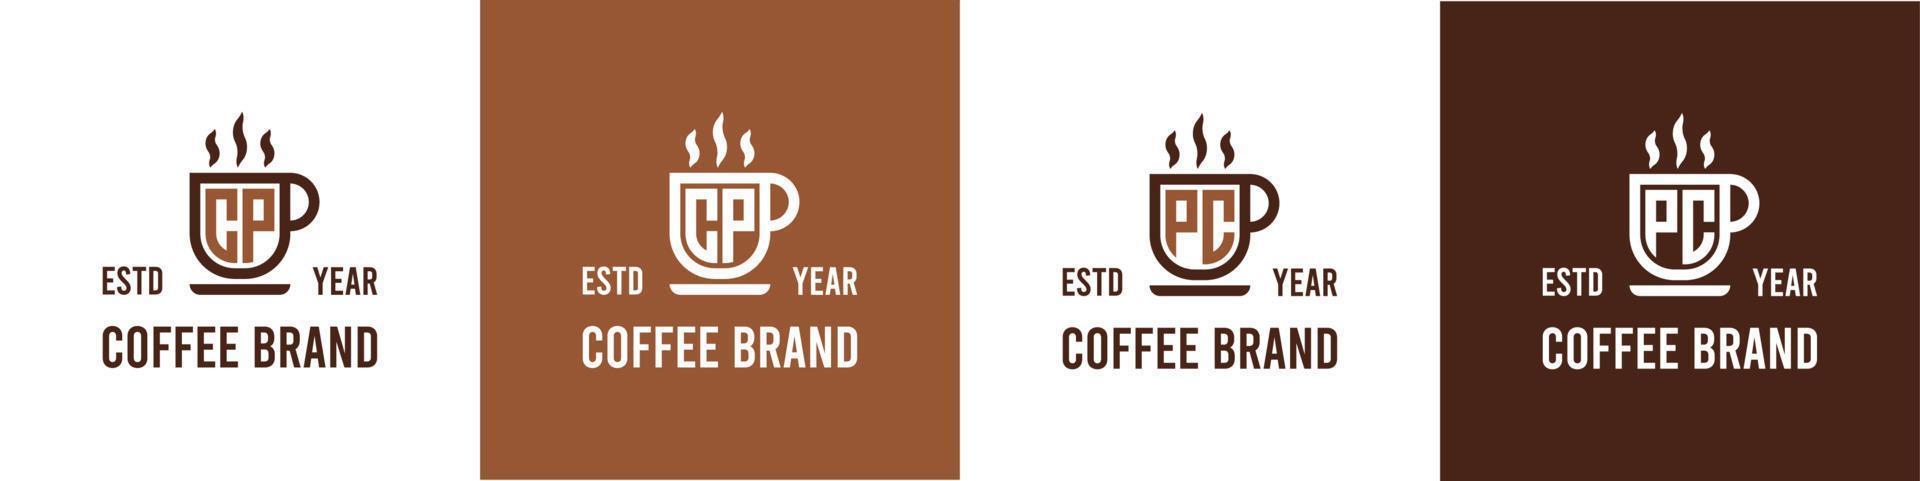 Letter CP and PC Coffee Logo, suitable for any business related to Coffee, Tea, or Other with CP or PC initials. vector